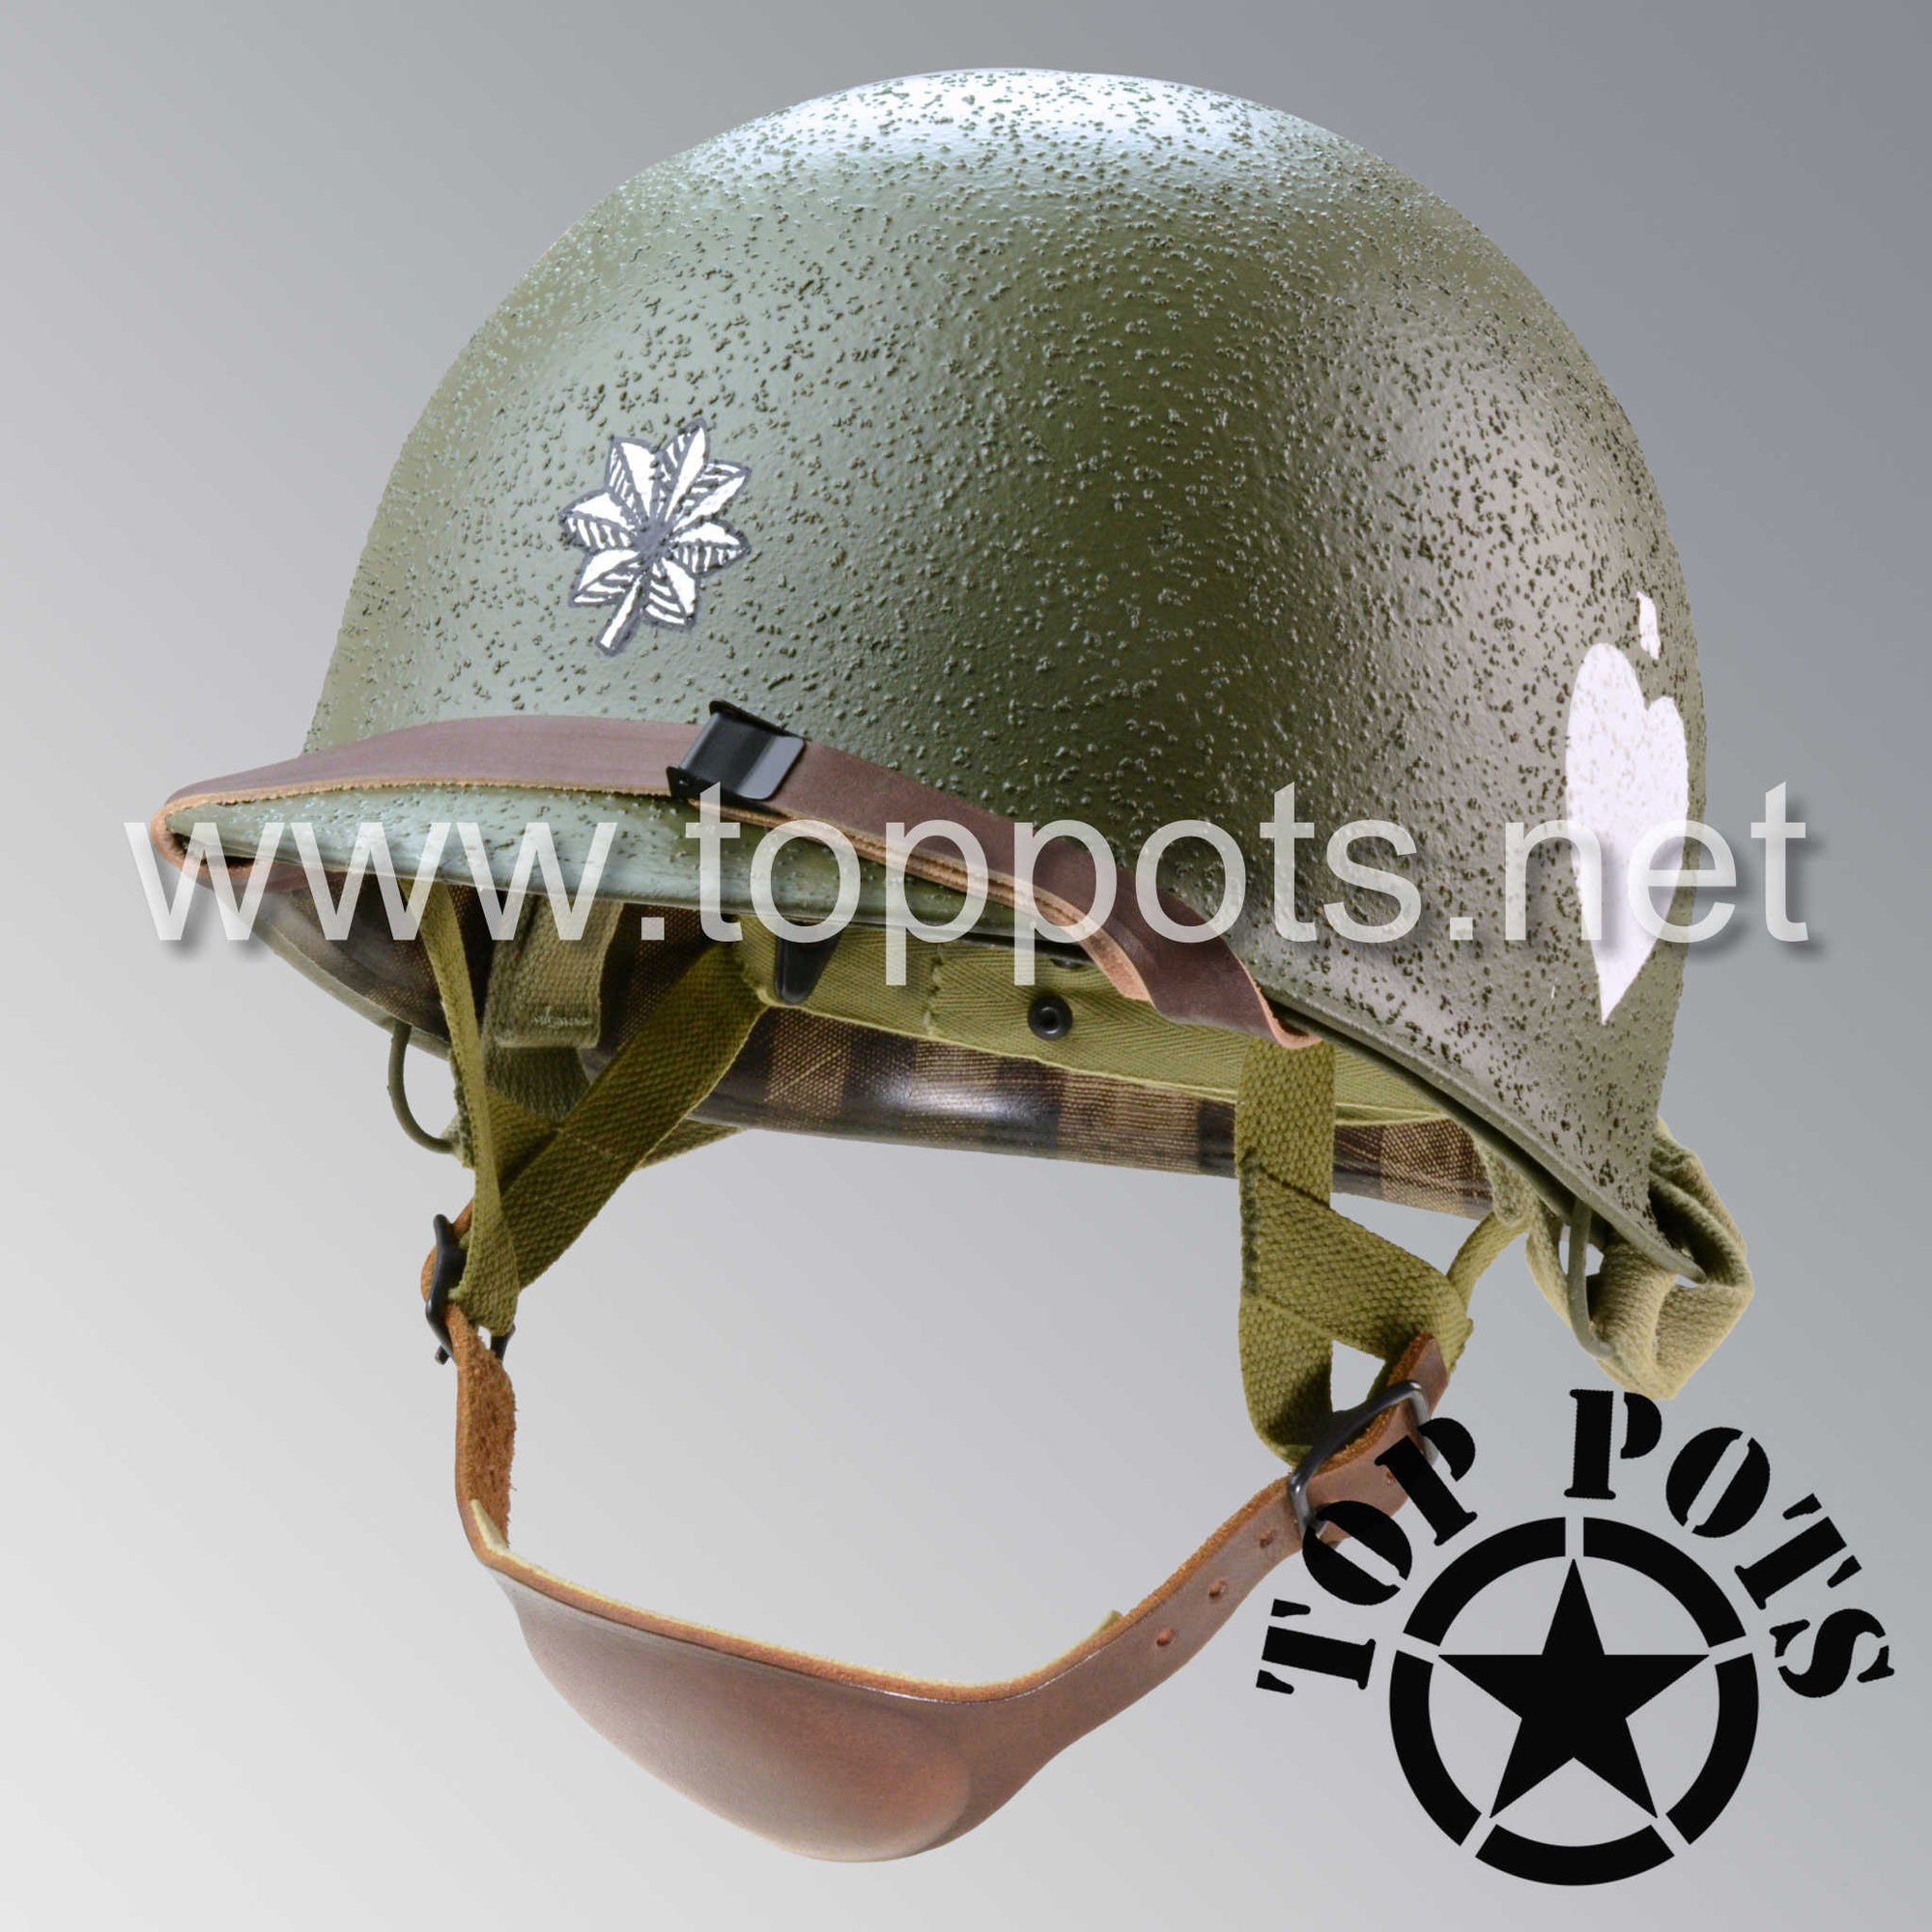 WWII US Army Restored Original M2 Paratrooper Airborne Helmet D Bale Shell and Liner with 502nd PIR Lt. Colonel Officer Emblem